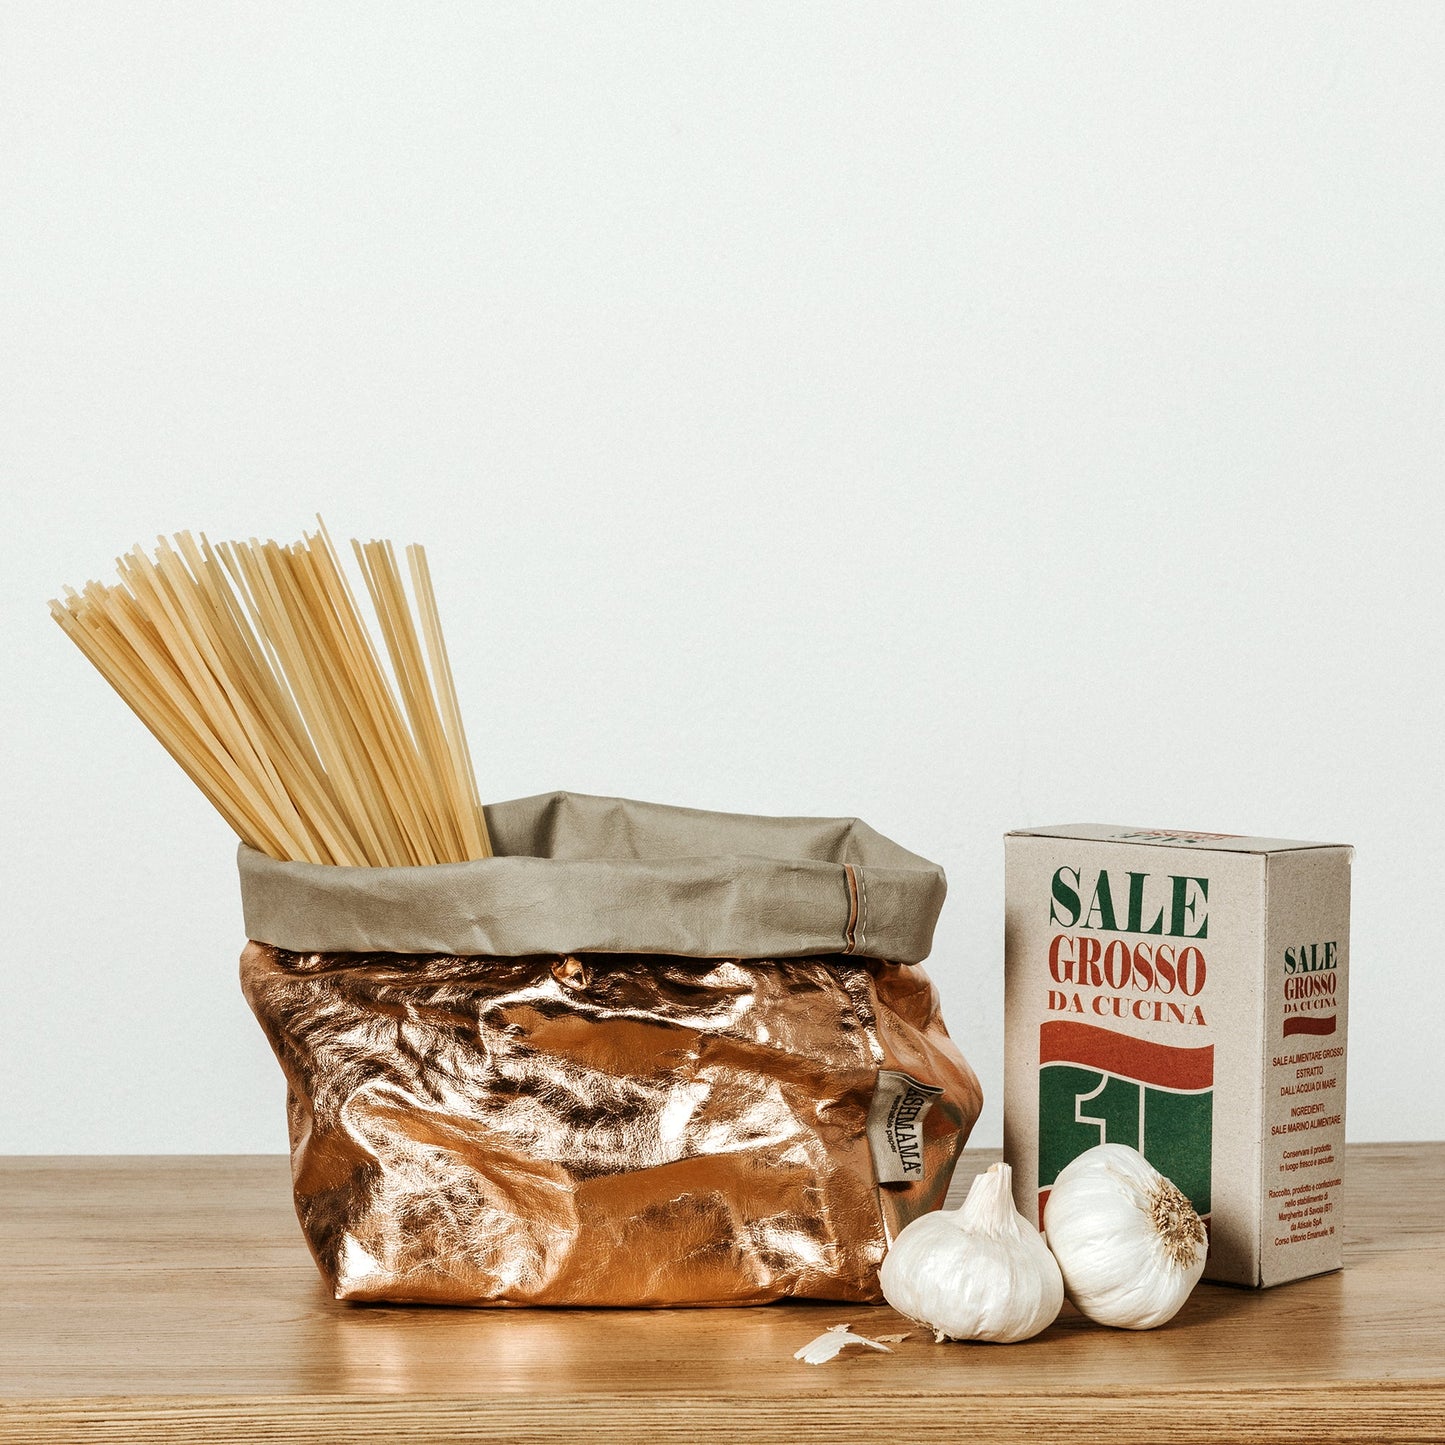 A washable paper bag is shown. The bag is rolled down at the top and features a UASHMAMA logo label on the bottom left corner. The bag pictured is the large size in rose gold metallic. Inside the bag there is some dried spaghetti. Next to the bag there isa box of sale and two bulbs of garlic.